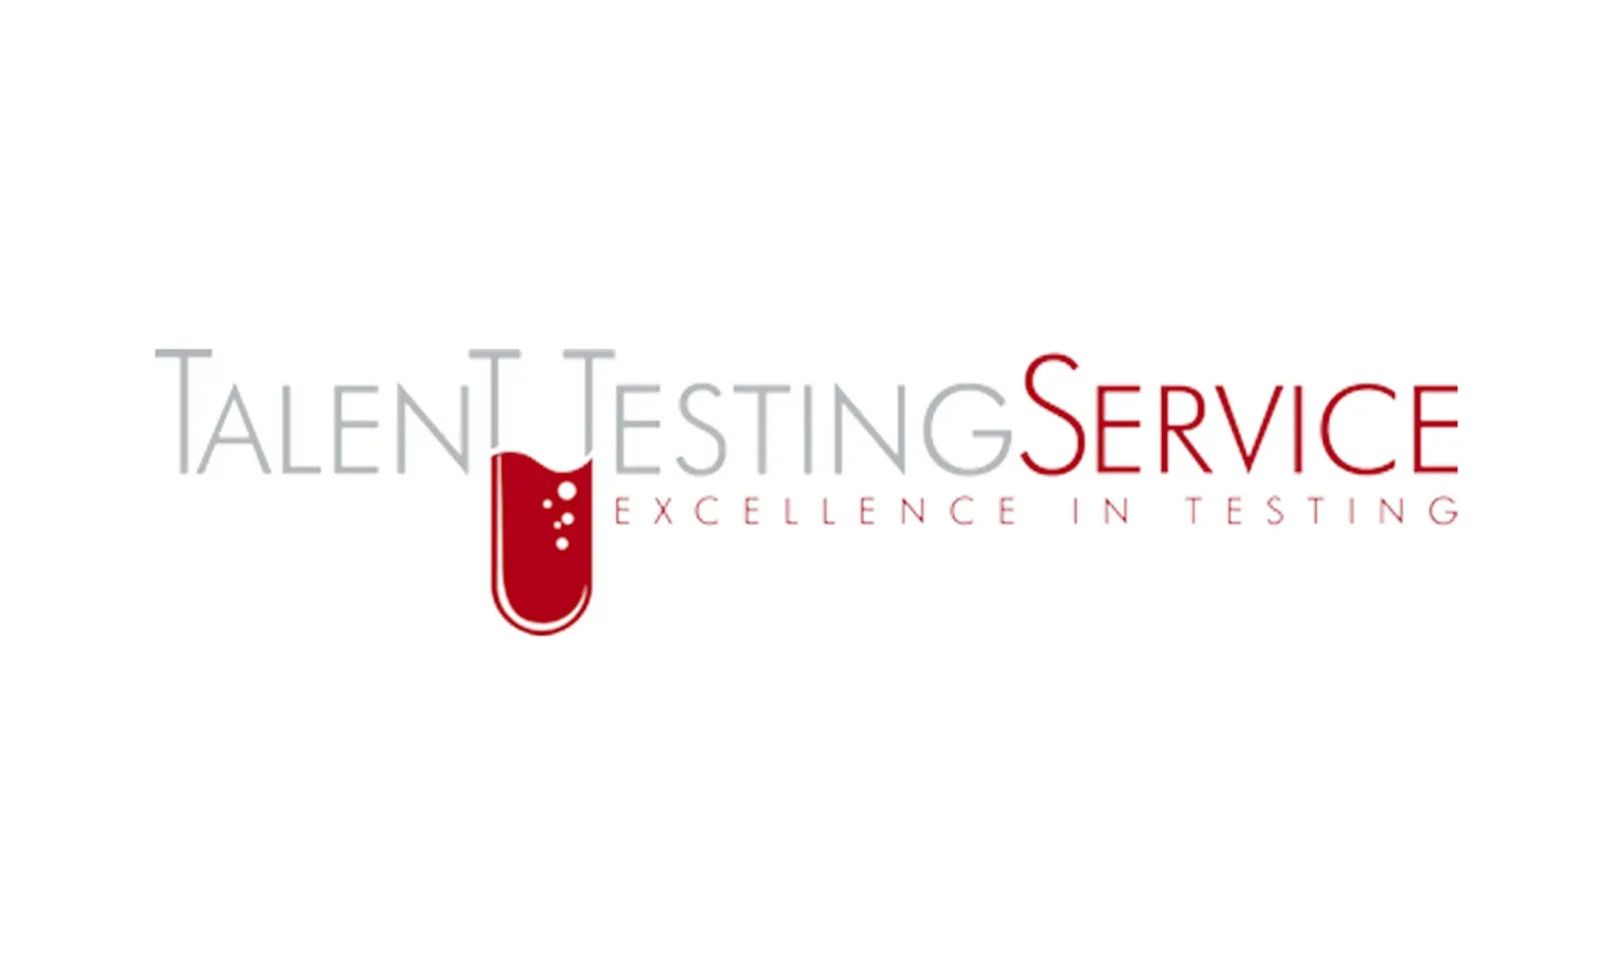 Talent Testing Service Reports Continuing Decline in STD Rates